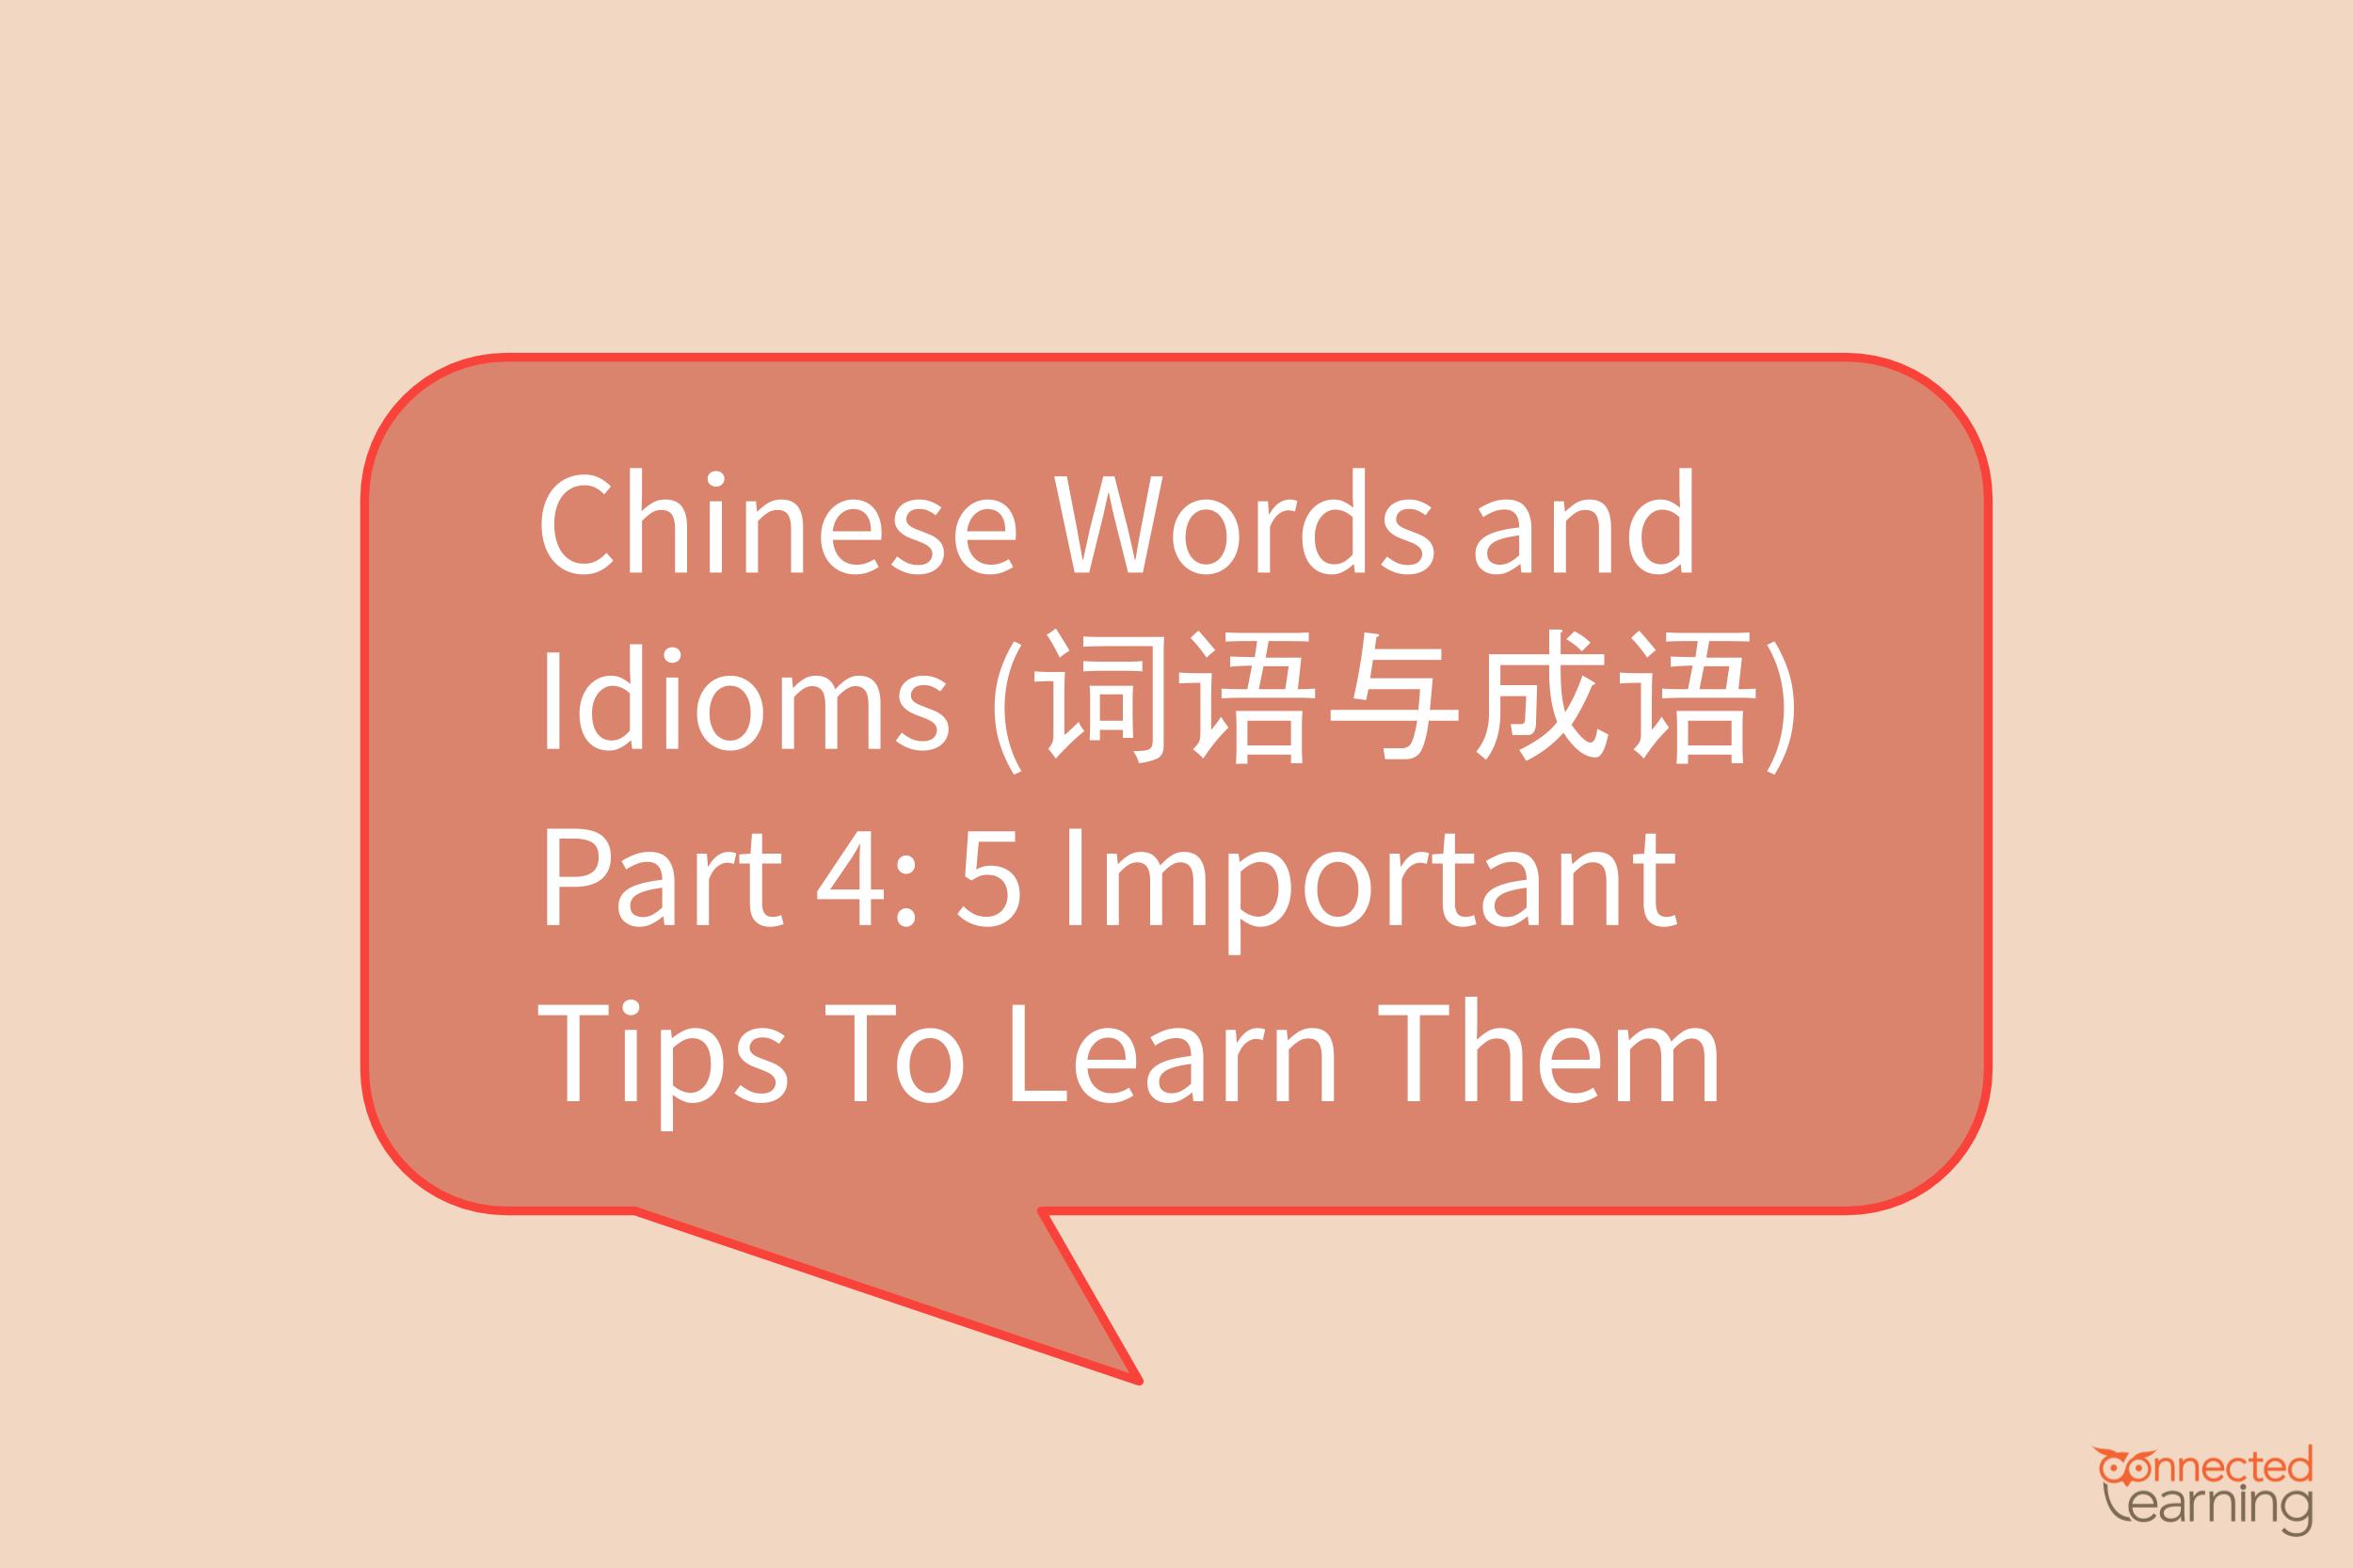 Chinese words and idioms